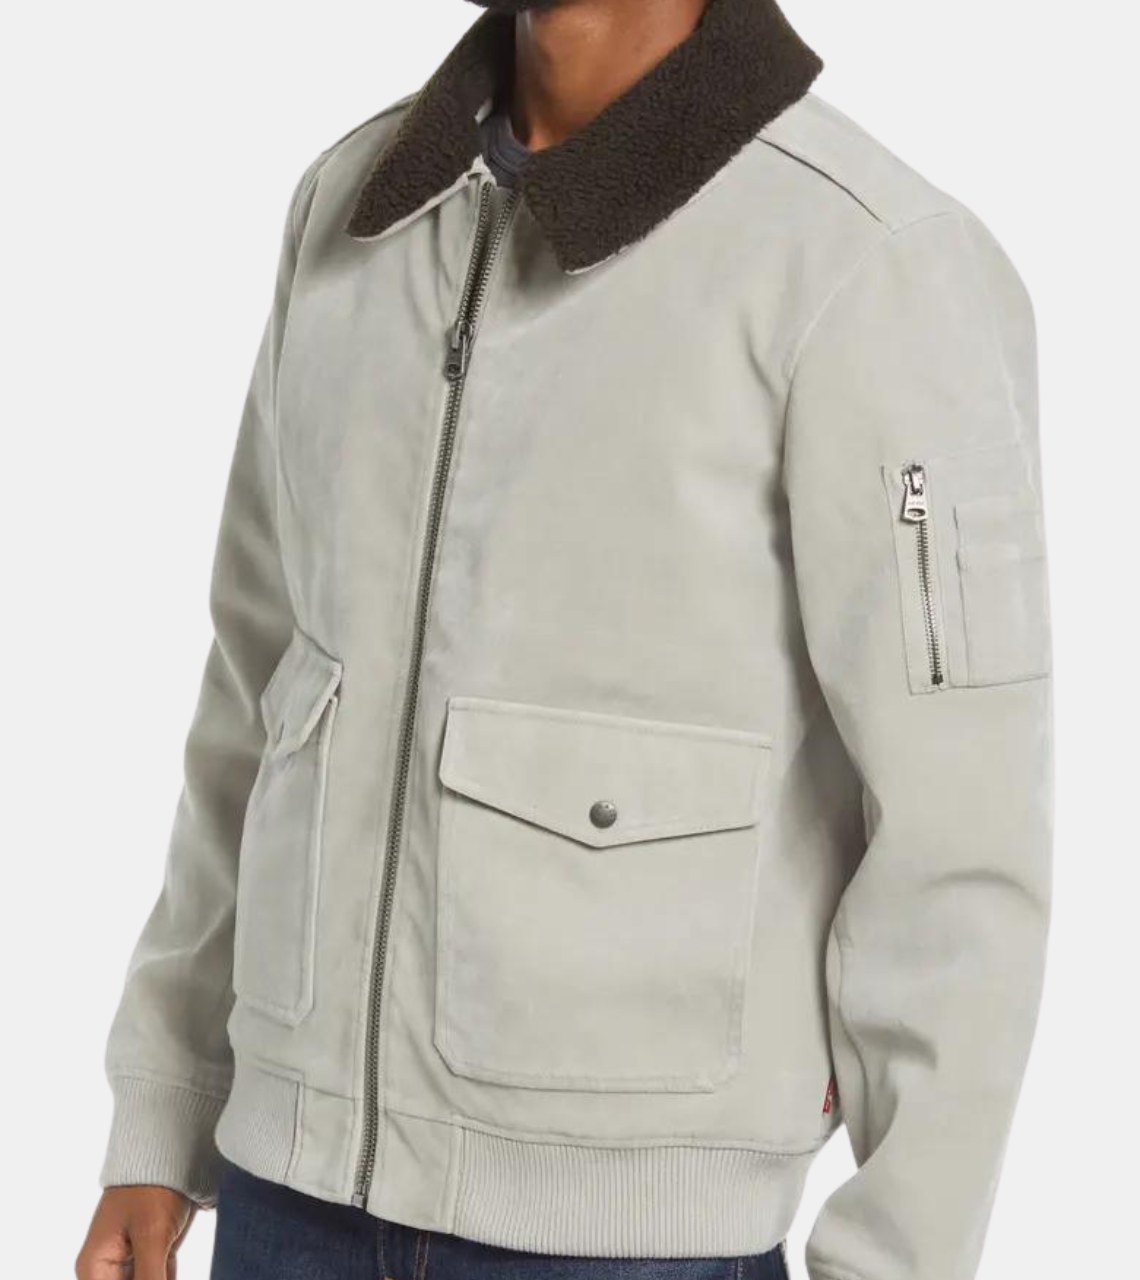 Blaire Ivory Suede Leather Aviator Jacket For Men's